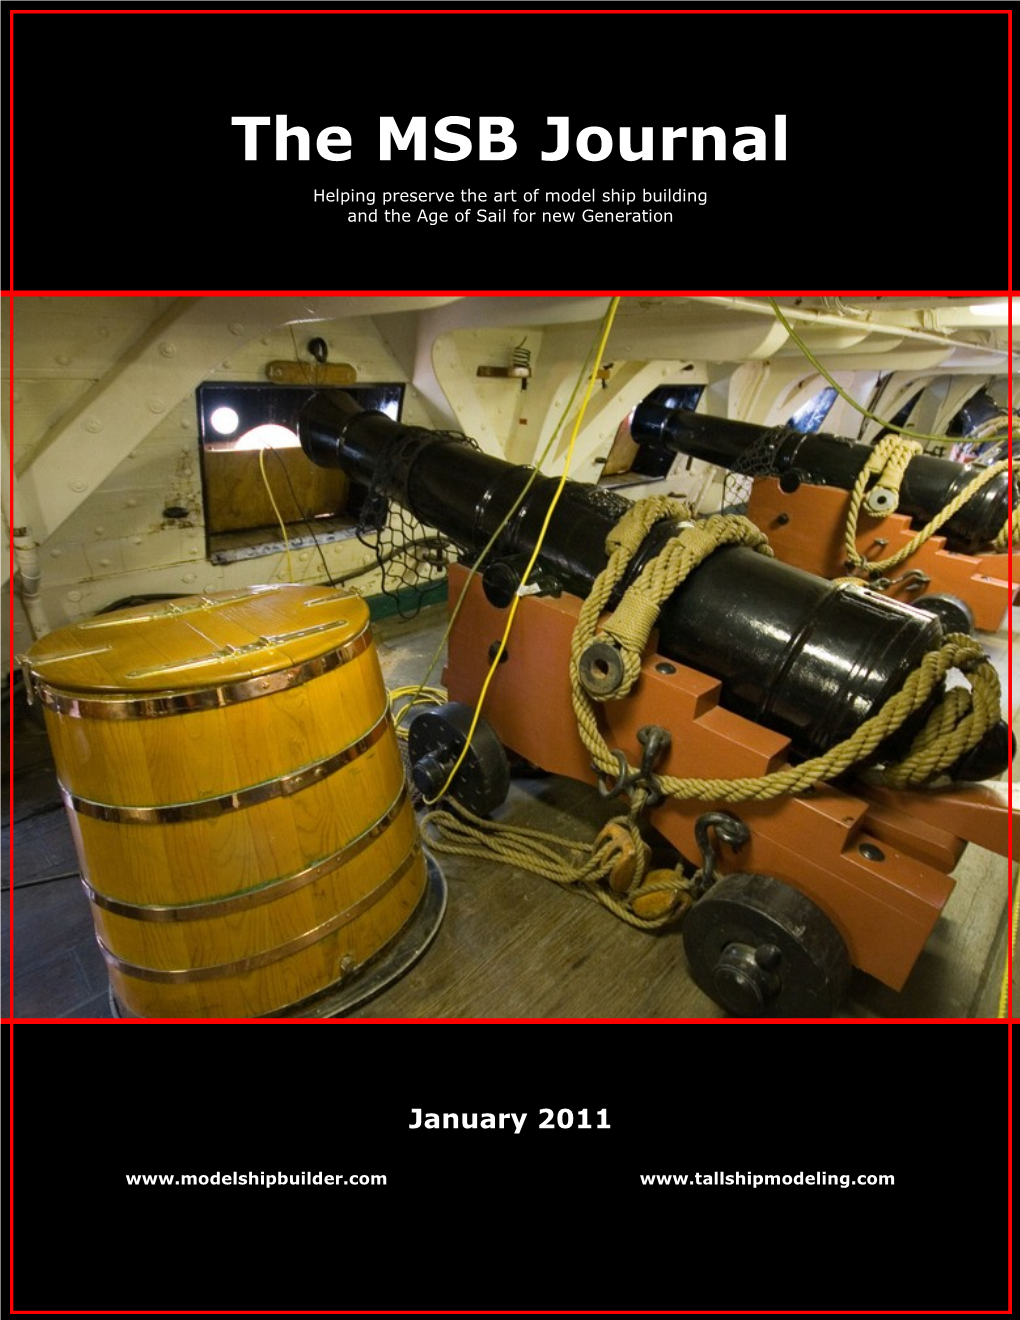 The MSB Journal Helping Preserve the Art of Model Ship Building and the Age of Sail for New Generation